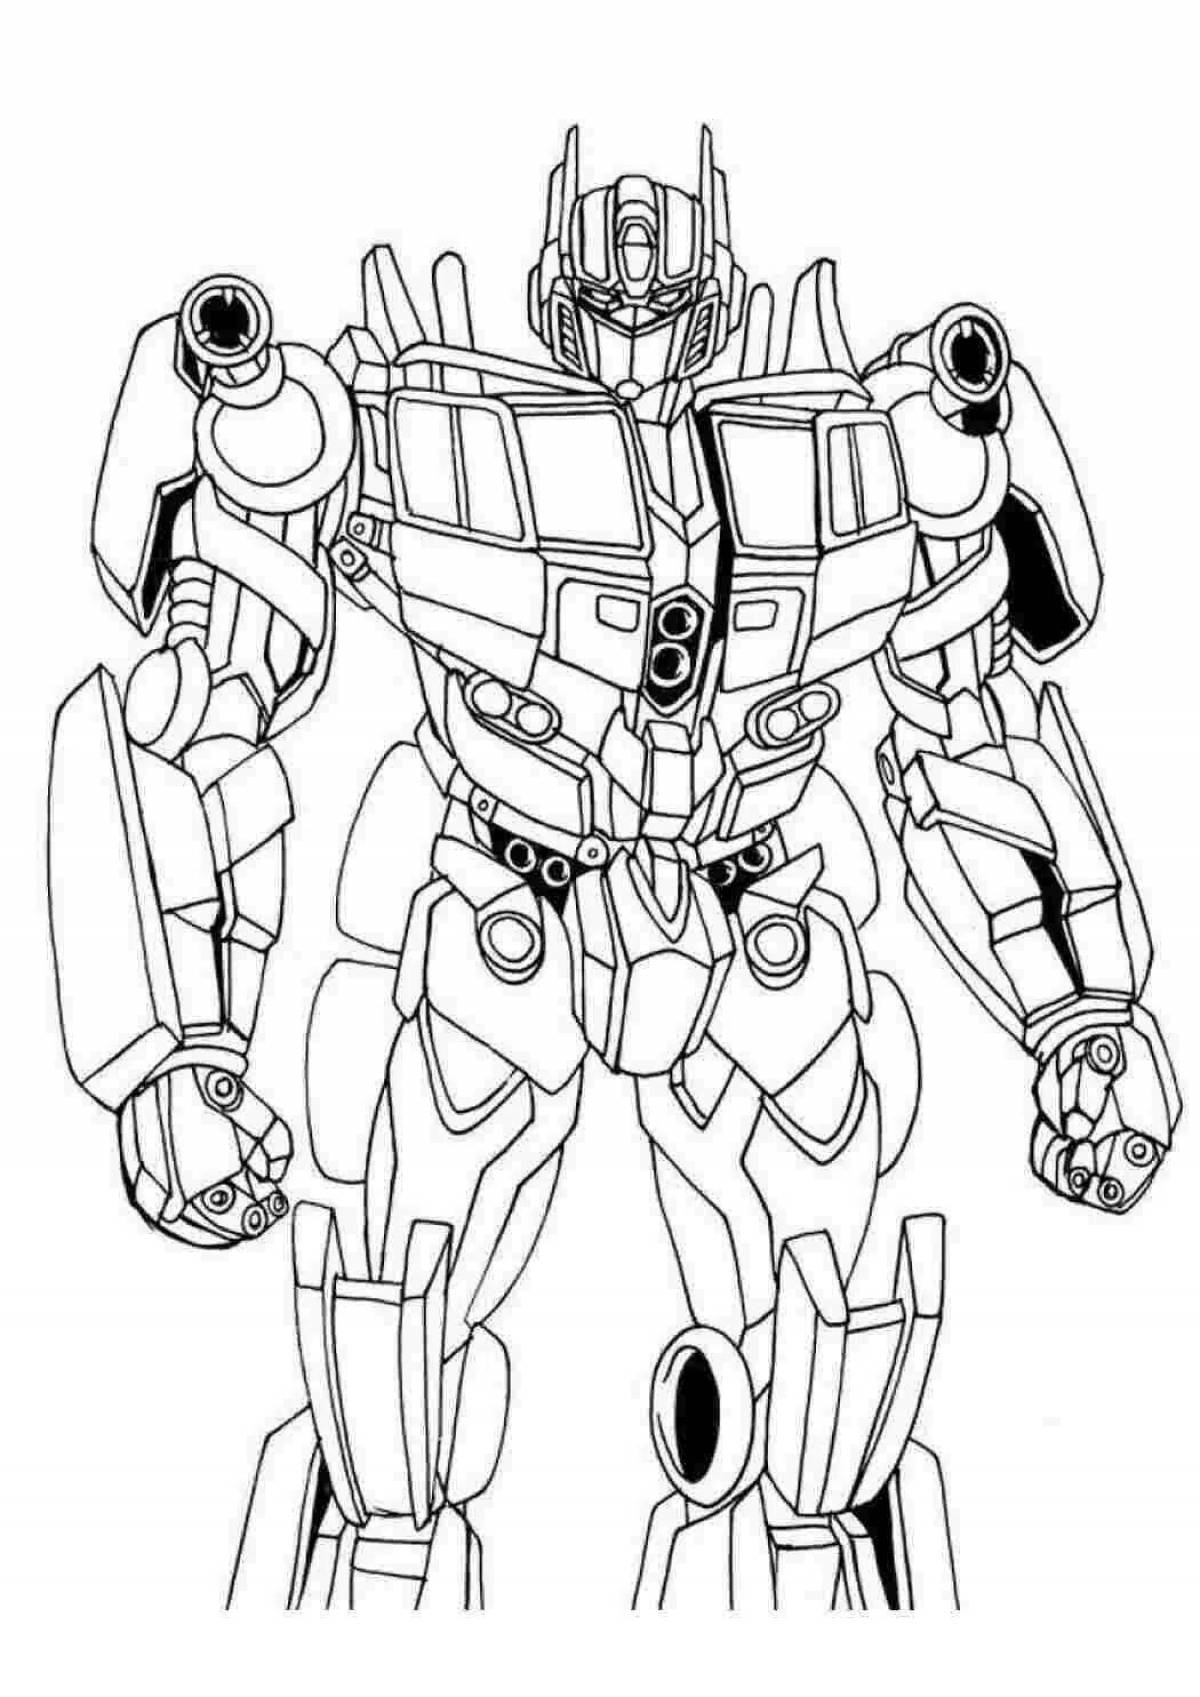 Cute transformers coloring pages for 6-7 year olds